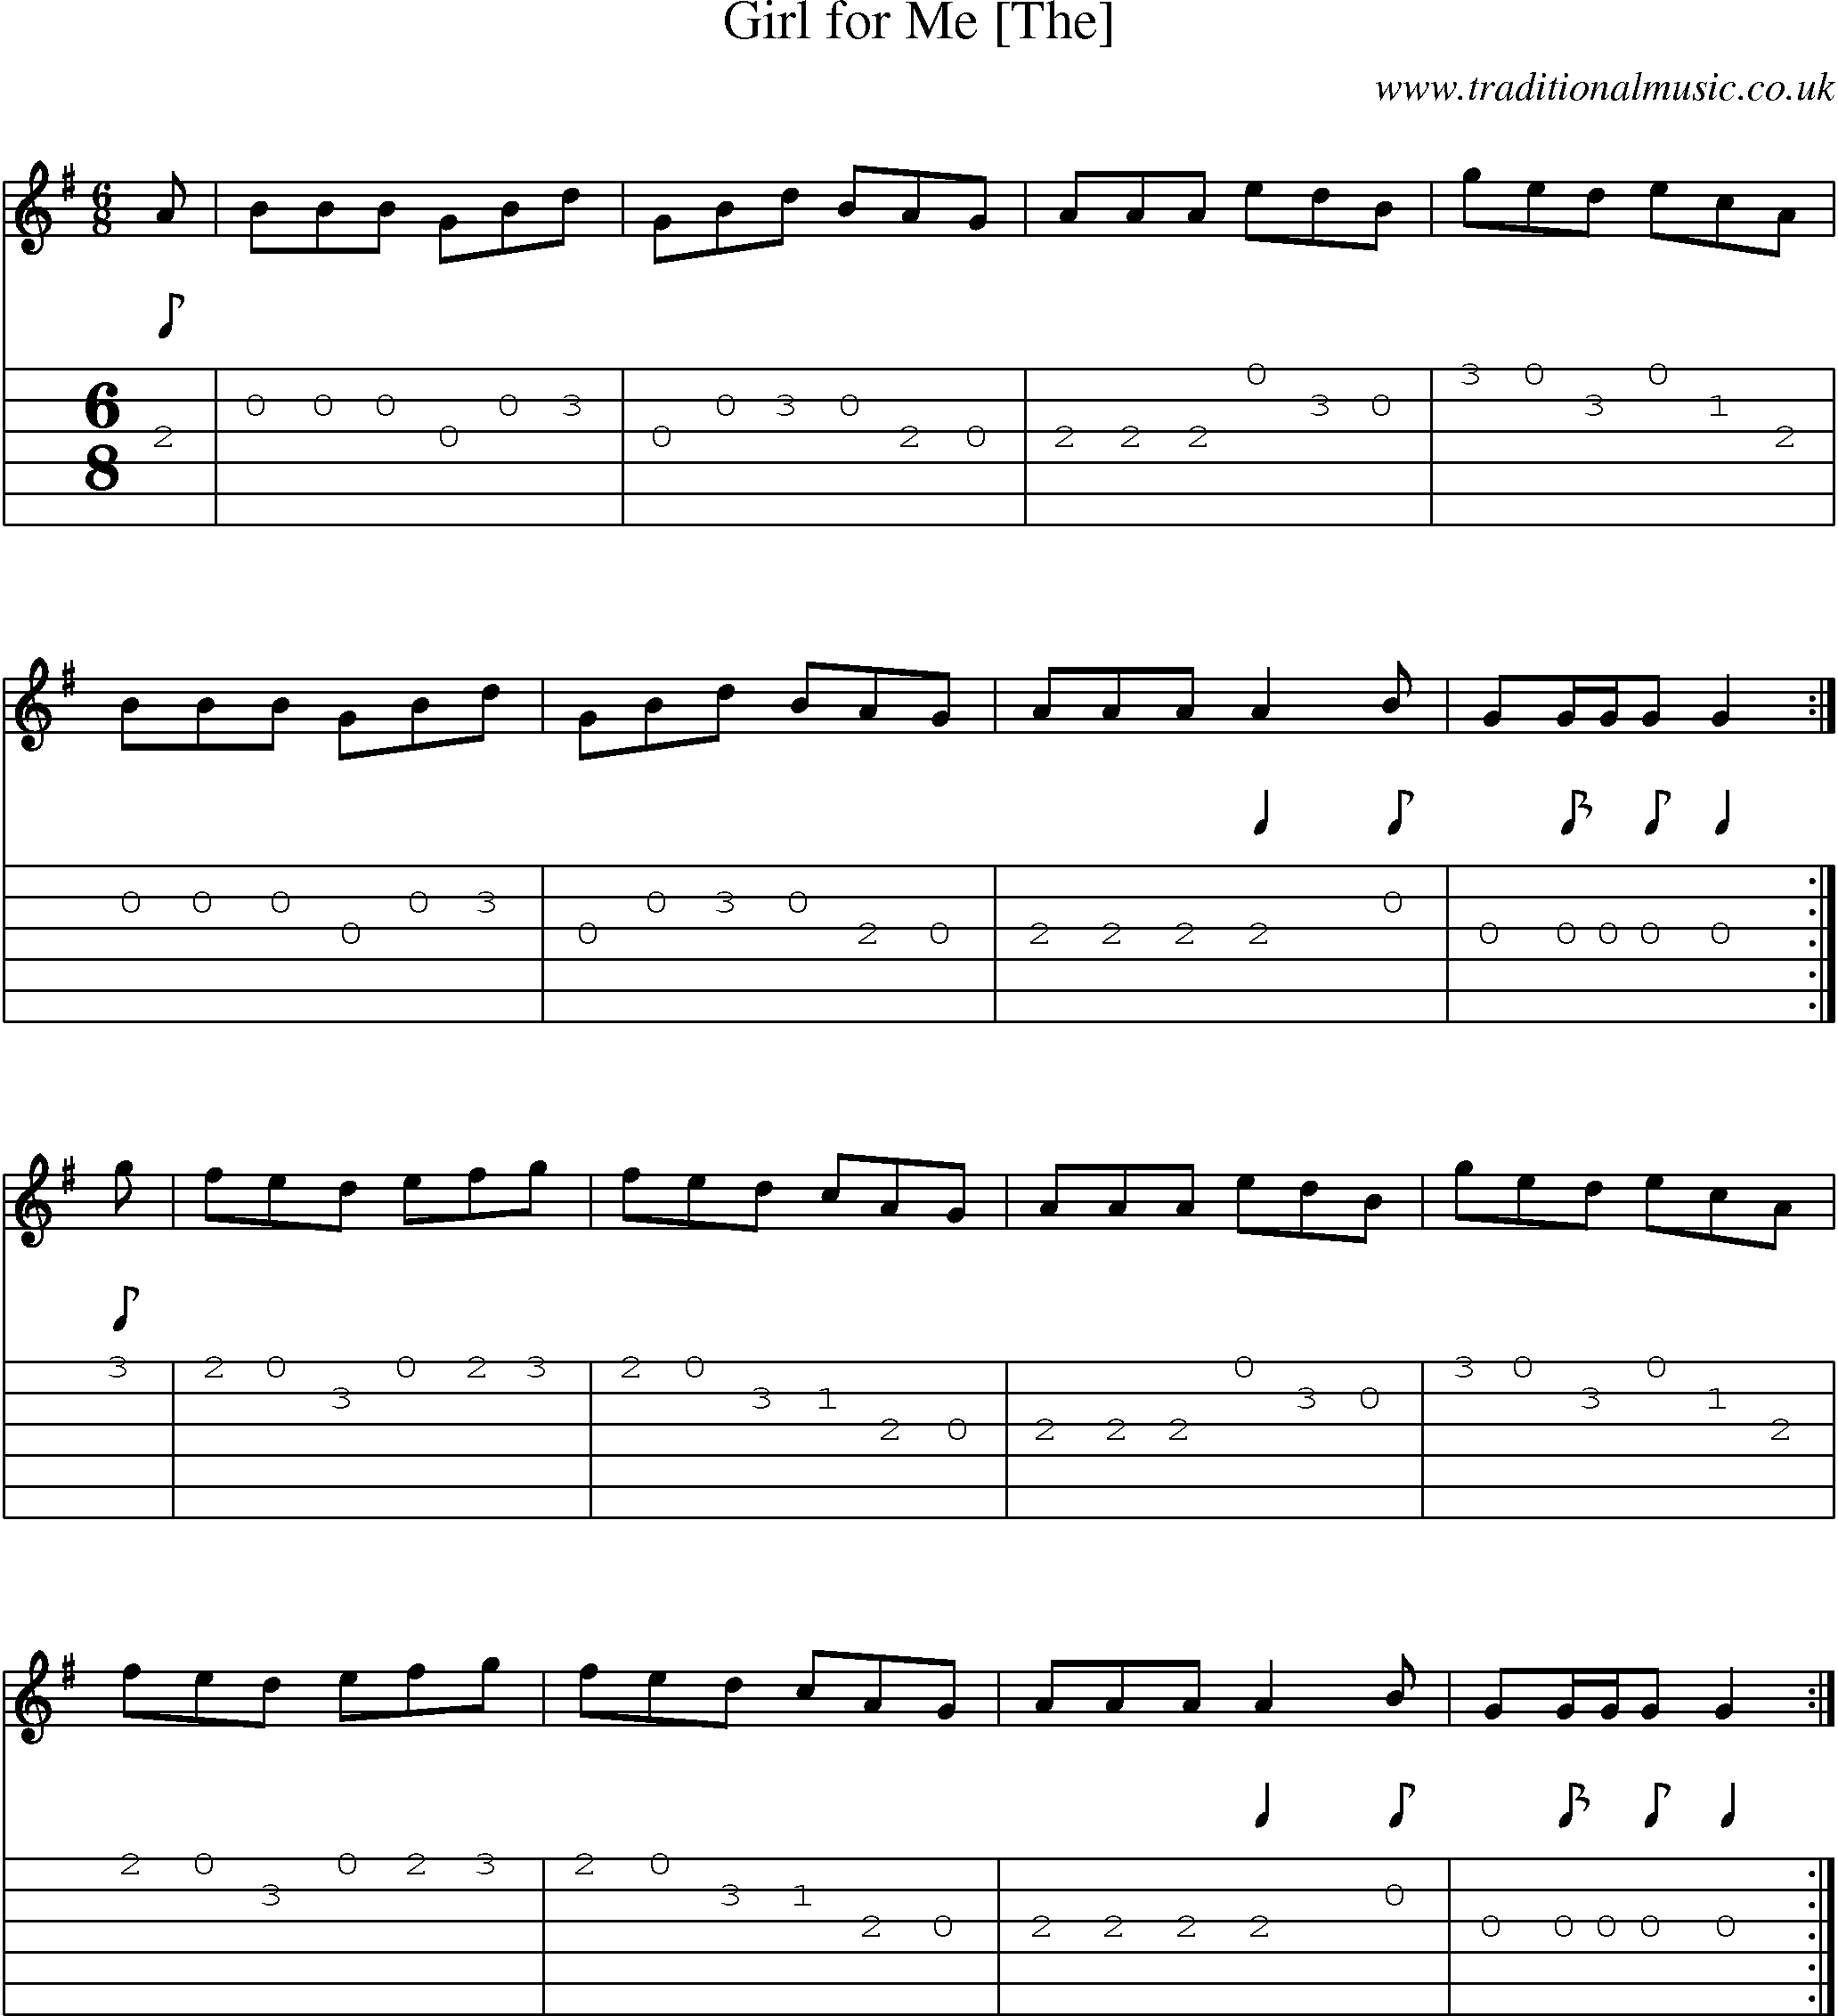 Music Score and Guitar Tabs for Girl For Me